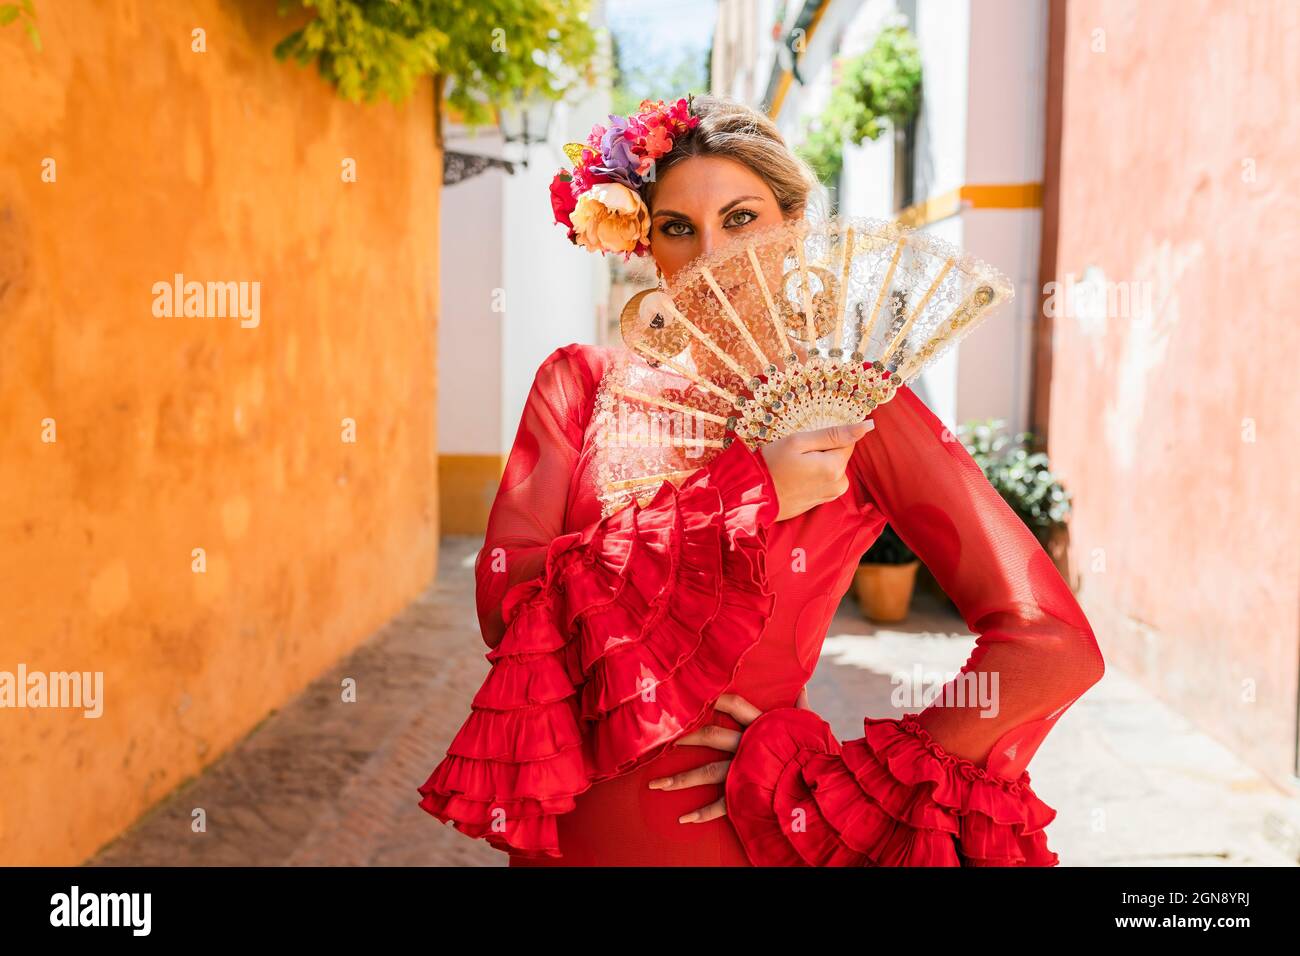 Female flamenco artist standing with hand on hip at alley Stock Photo